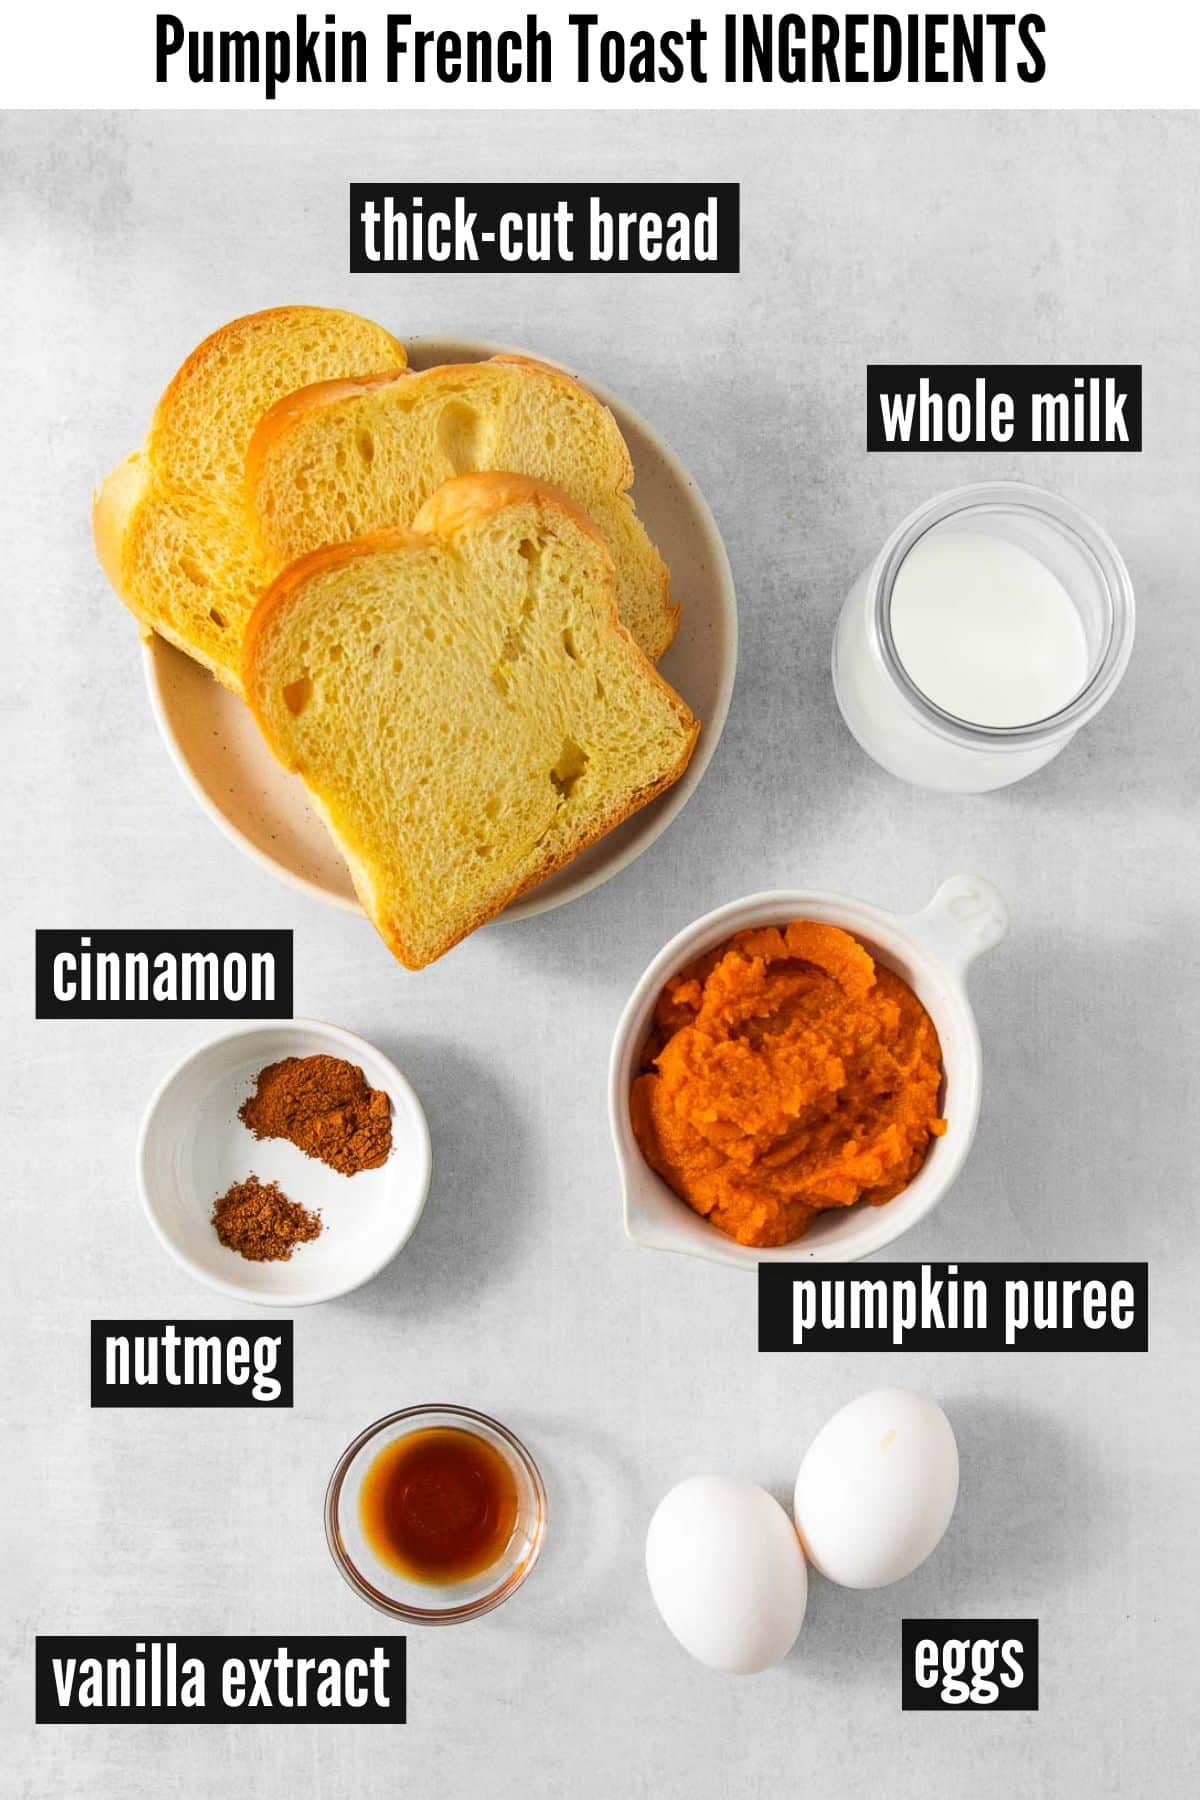 pumpkin french toast labelled ingredients.